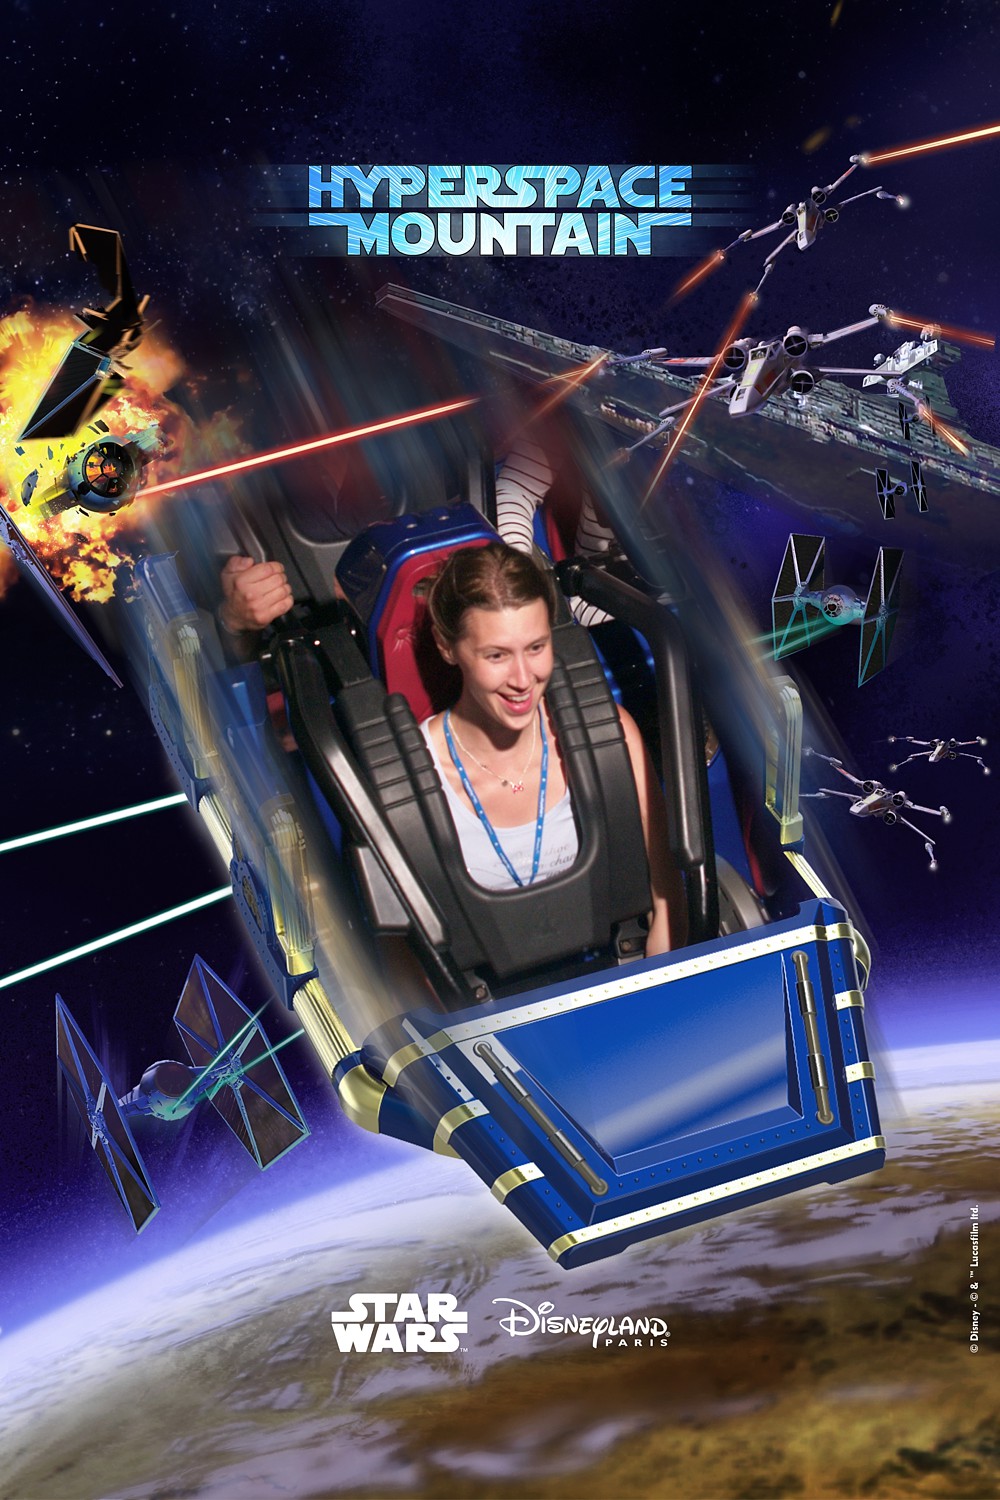 photography from Hyperspace Mountain at Disneyland Paris in Marne-la-Vallée, France